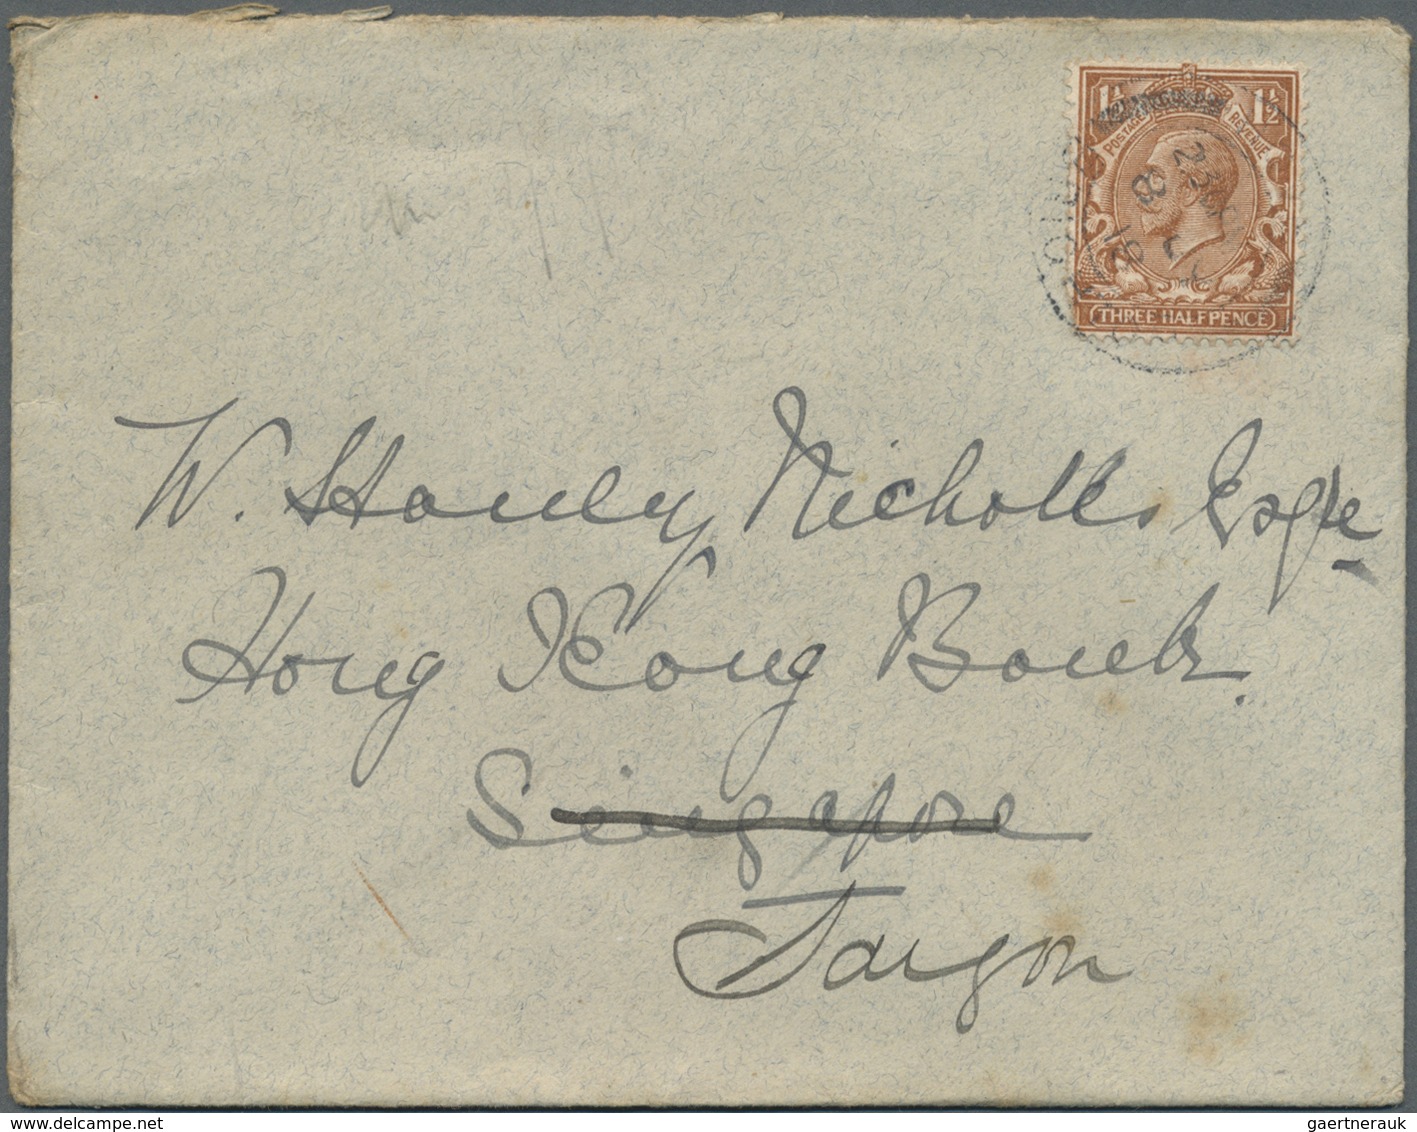 Br China - Incoming Mail: 1916/18, Great Britain, the Nicholls correspondence of small size covers (11)